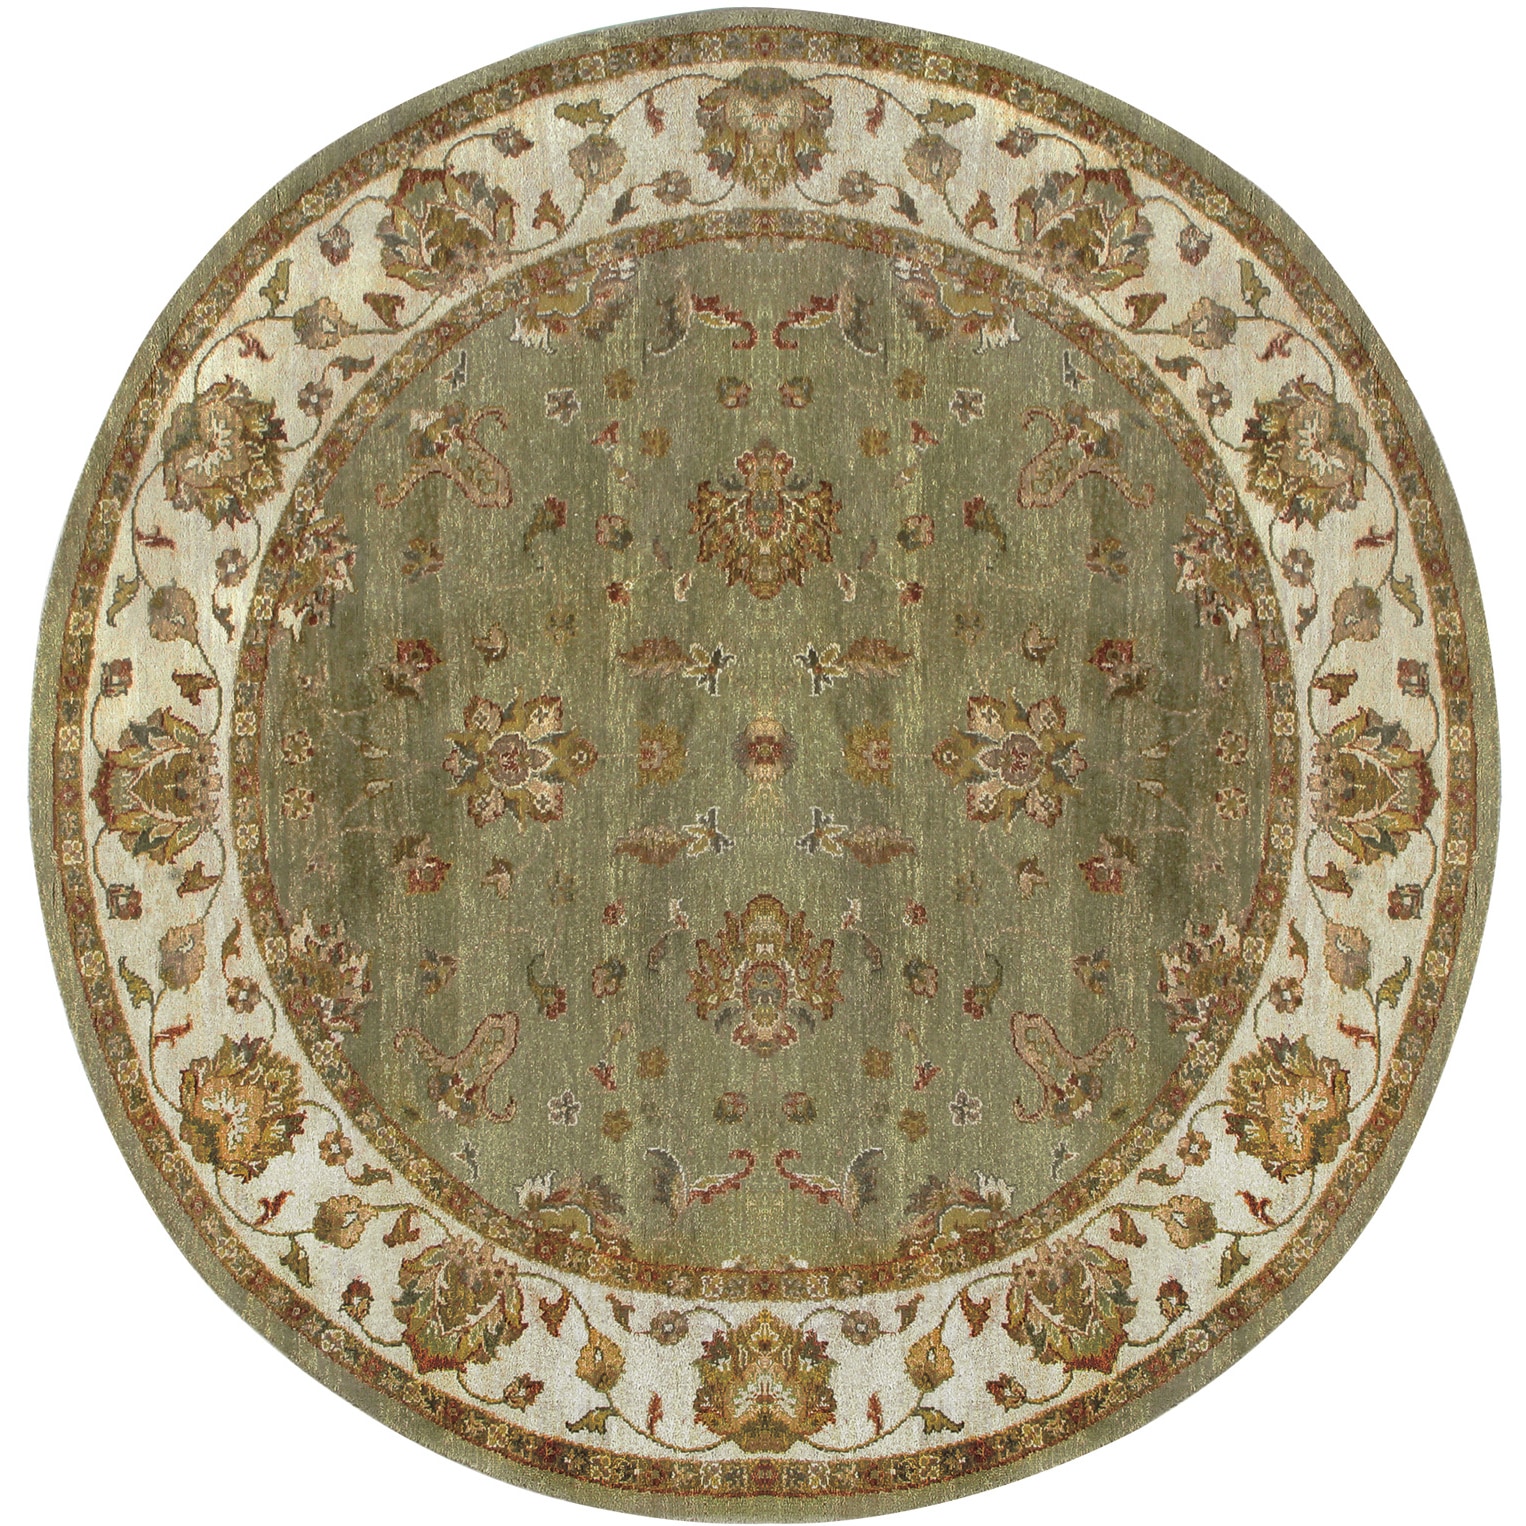 Hand knotted Ziegler Green Beige Vegetable Dyes Wool Rug (8 Round)